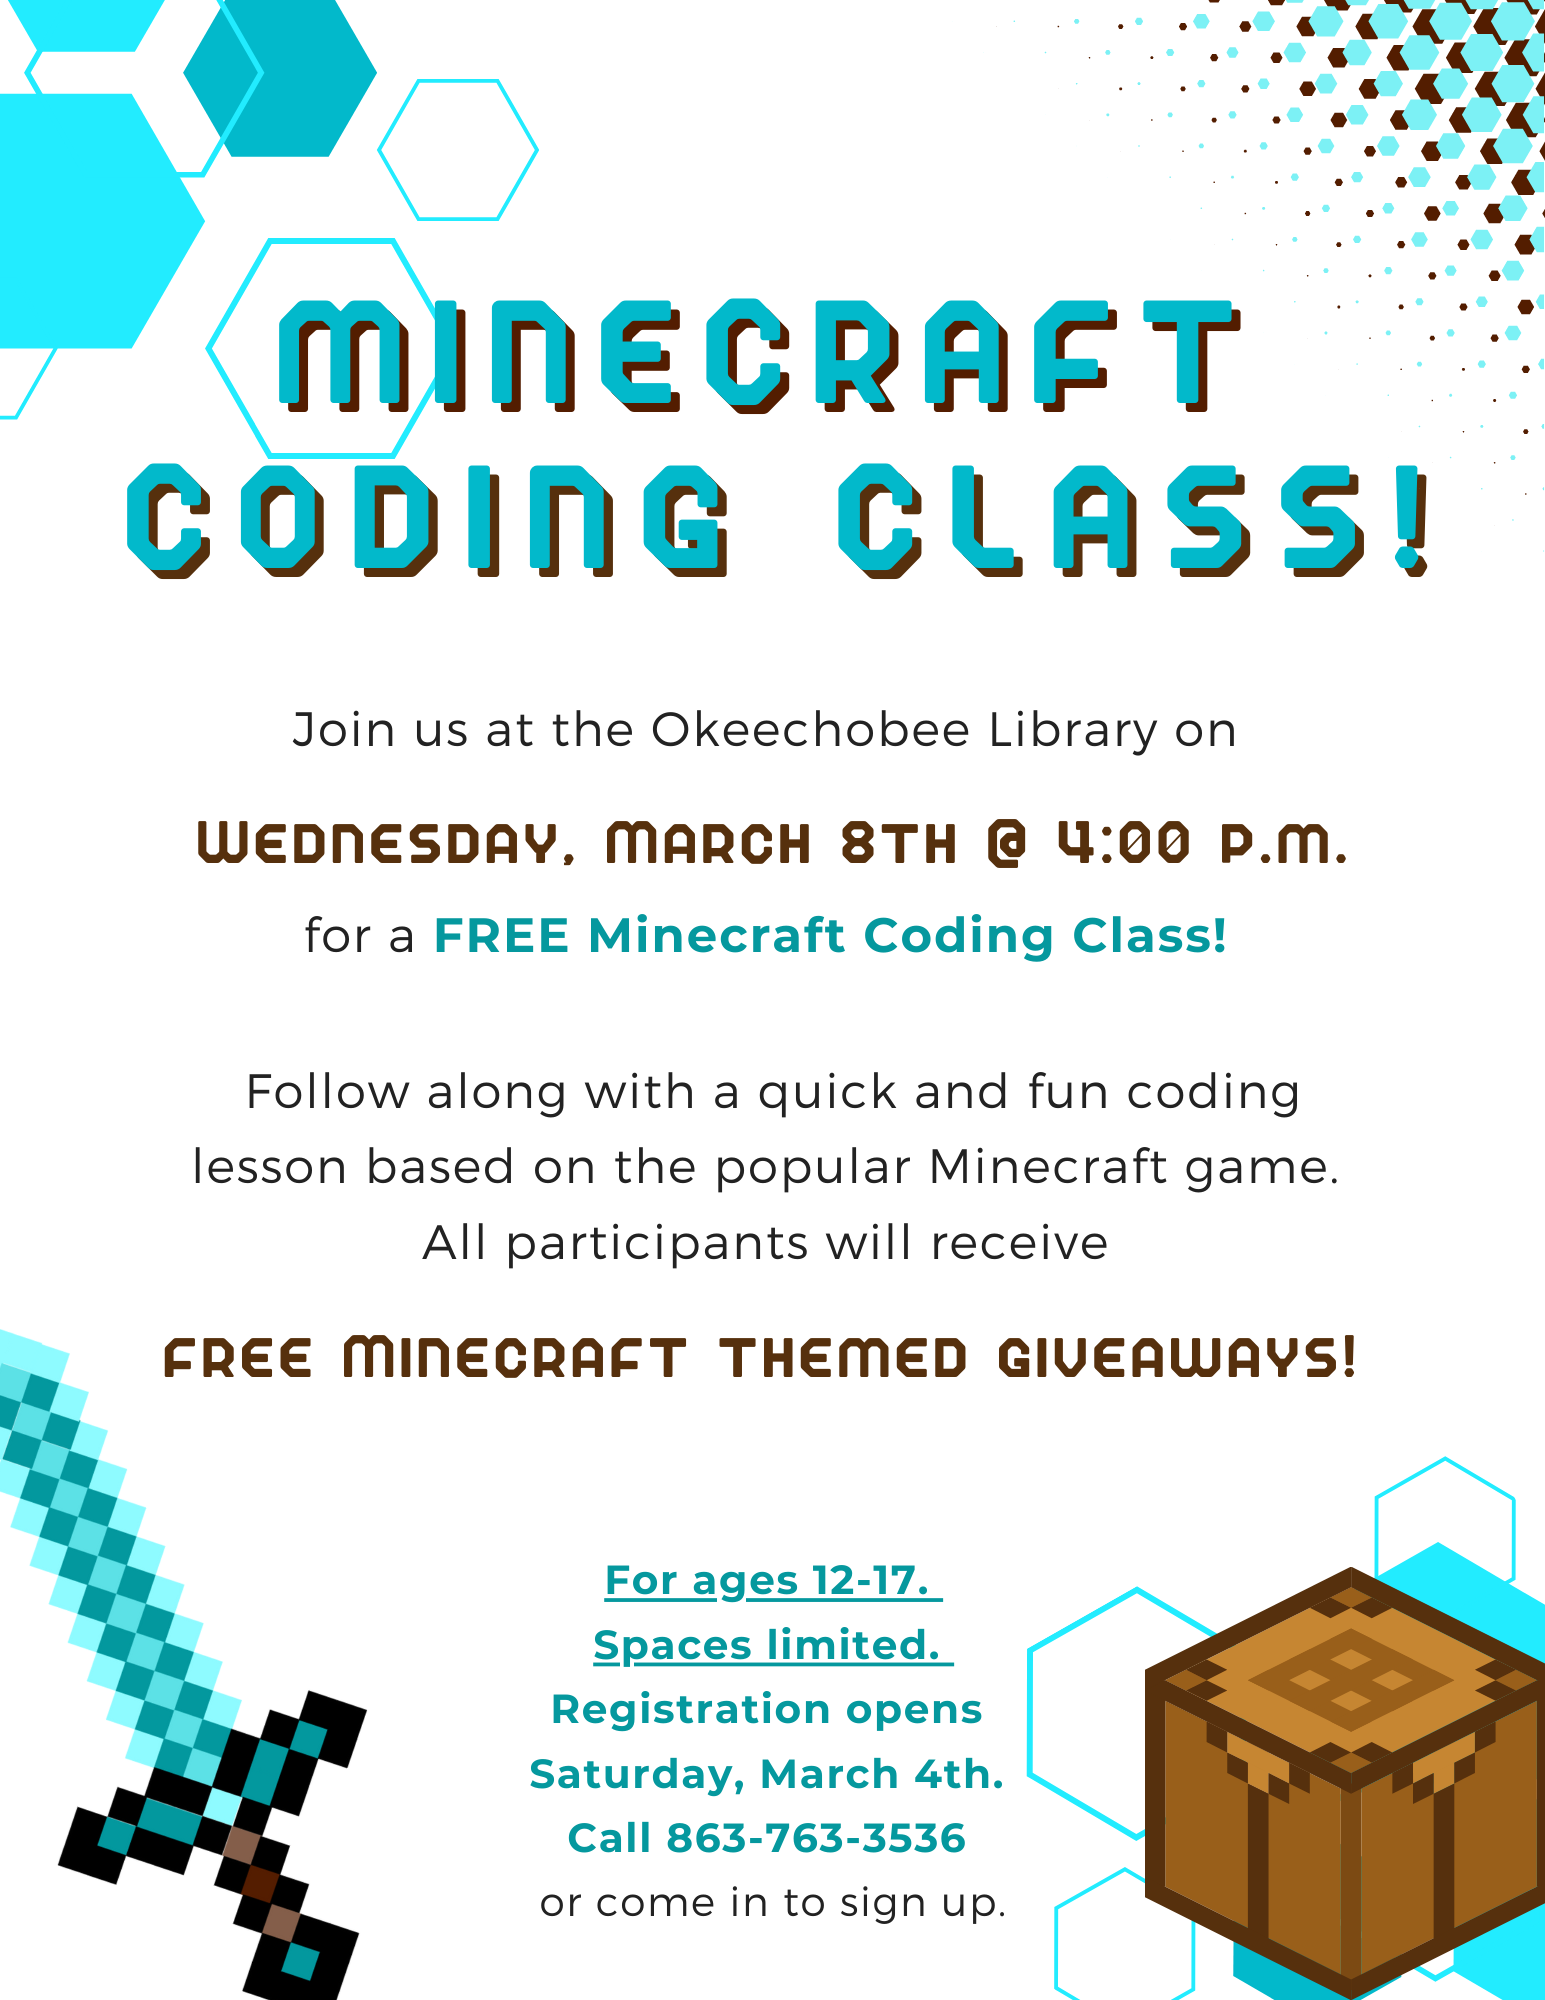 Join us at the Okeechobee Library on Wednesday, March 8th @ 4:00 p.m. for a FREE Minecraft Coding Activity!